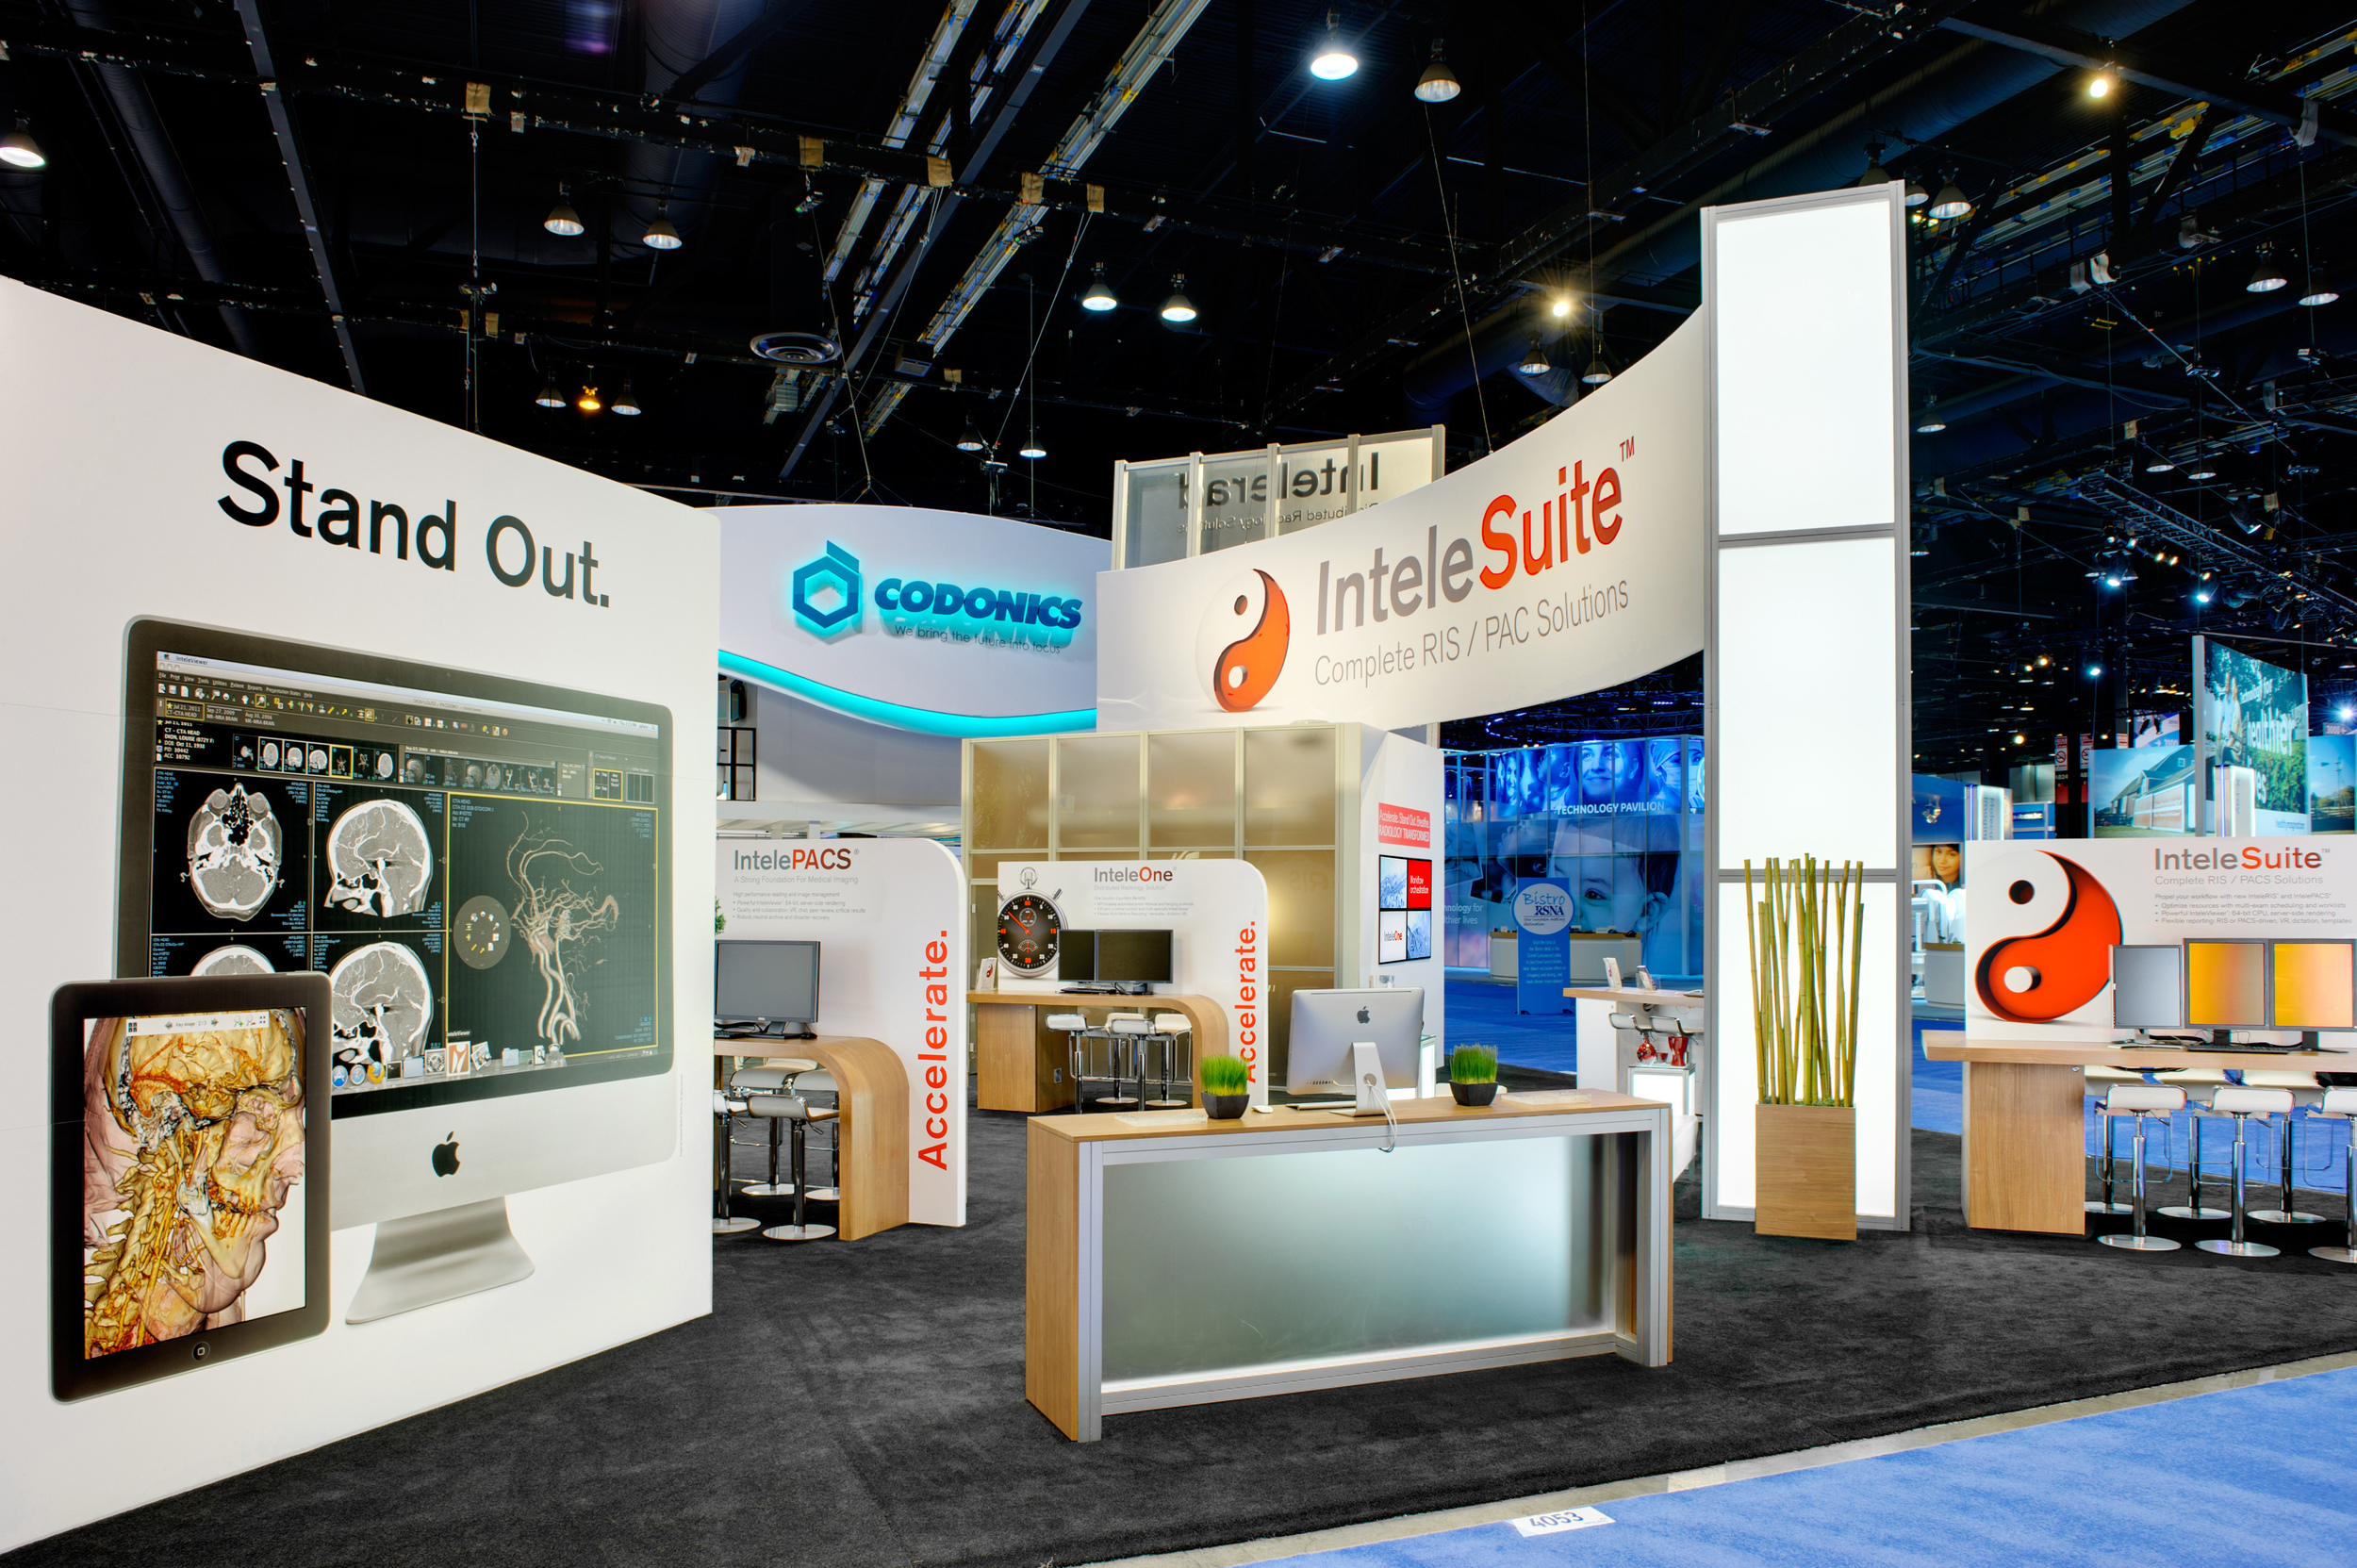 A view of Intelerad's trade show booth rental showing the large graphics and light tower